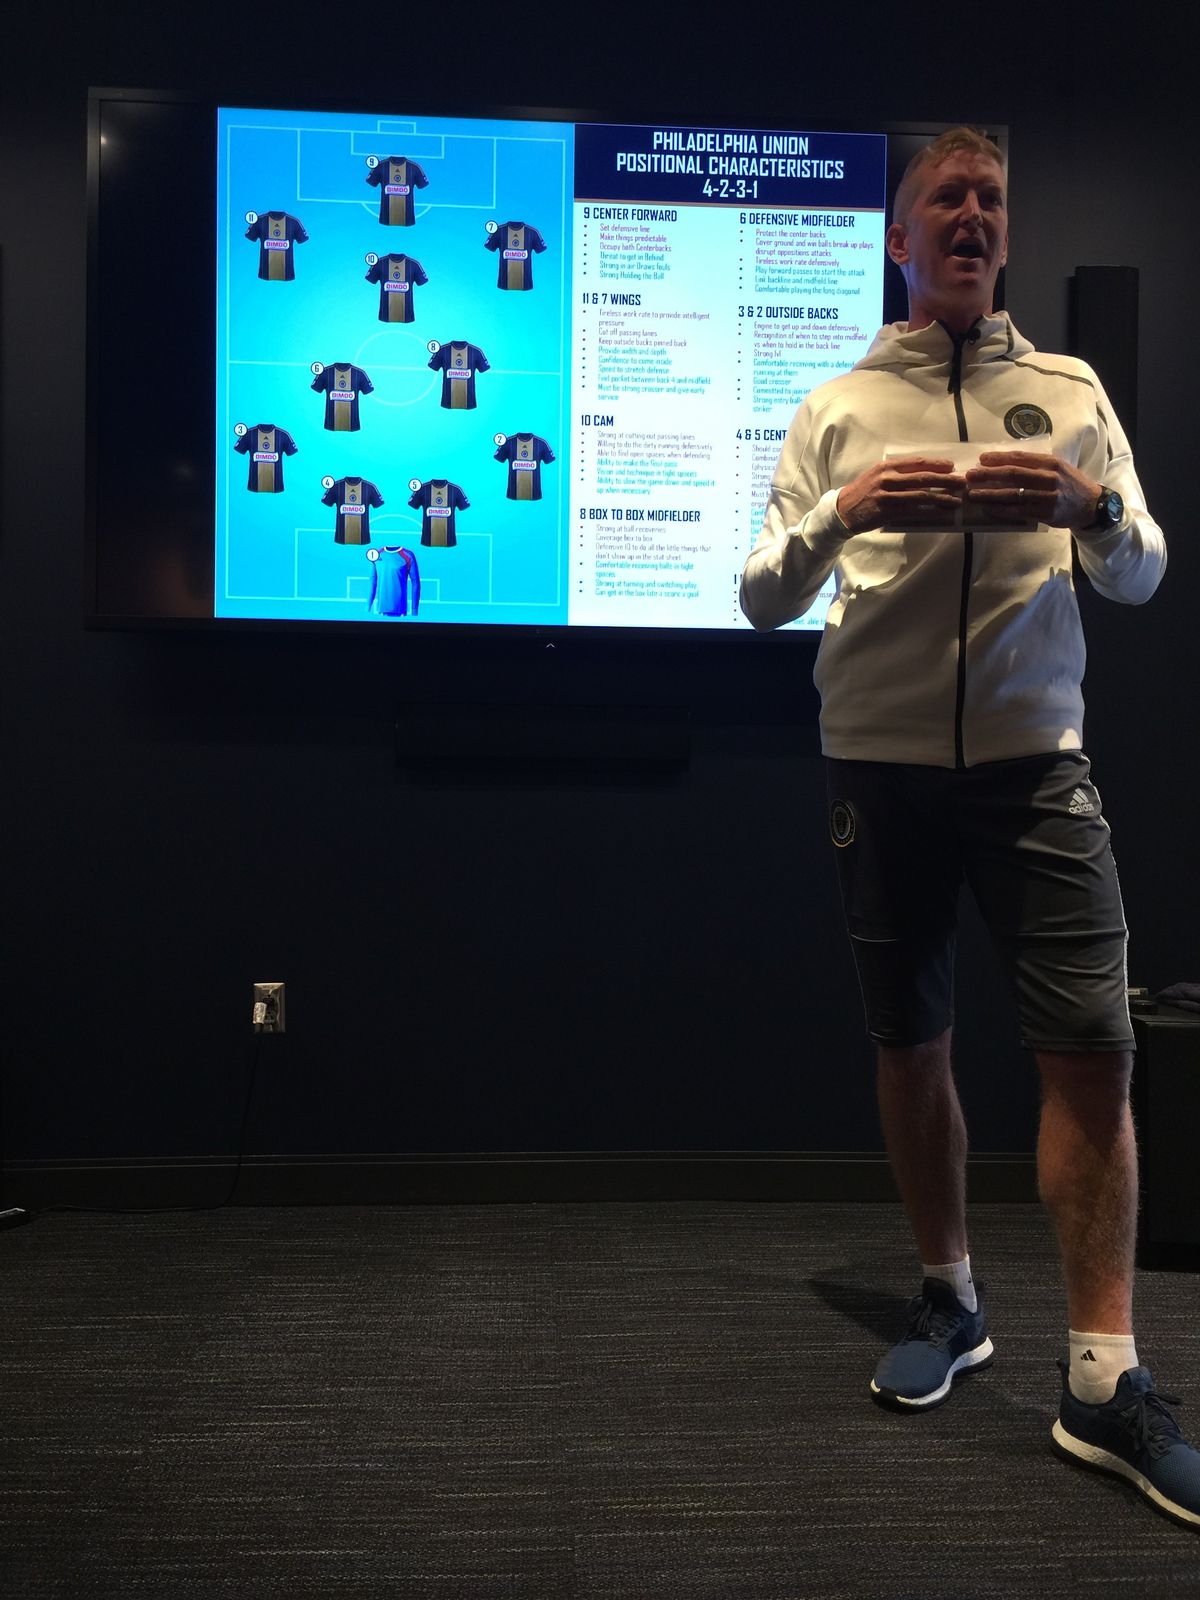 Philadelphia Union manager Jim Curtin discusses the Union’s playing philosophy.